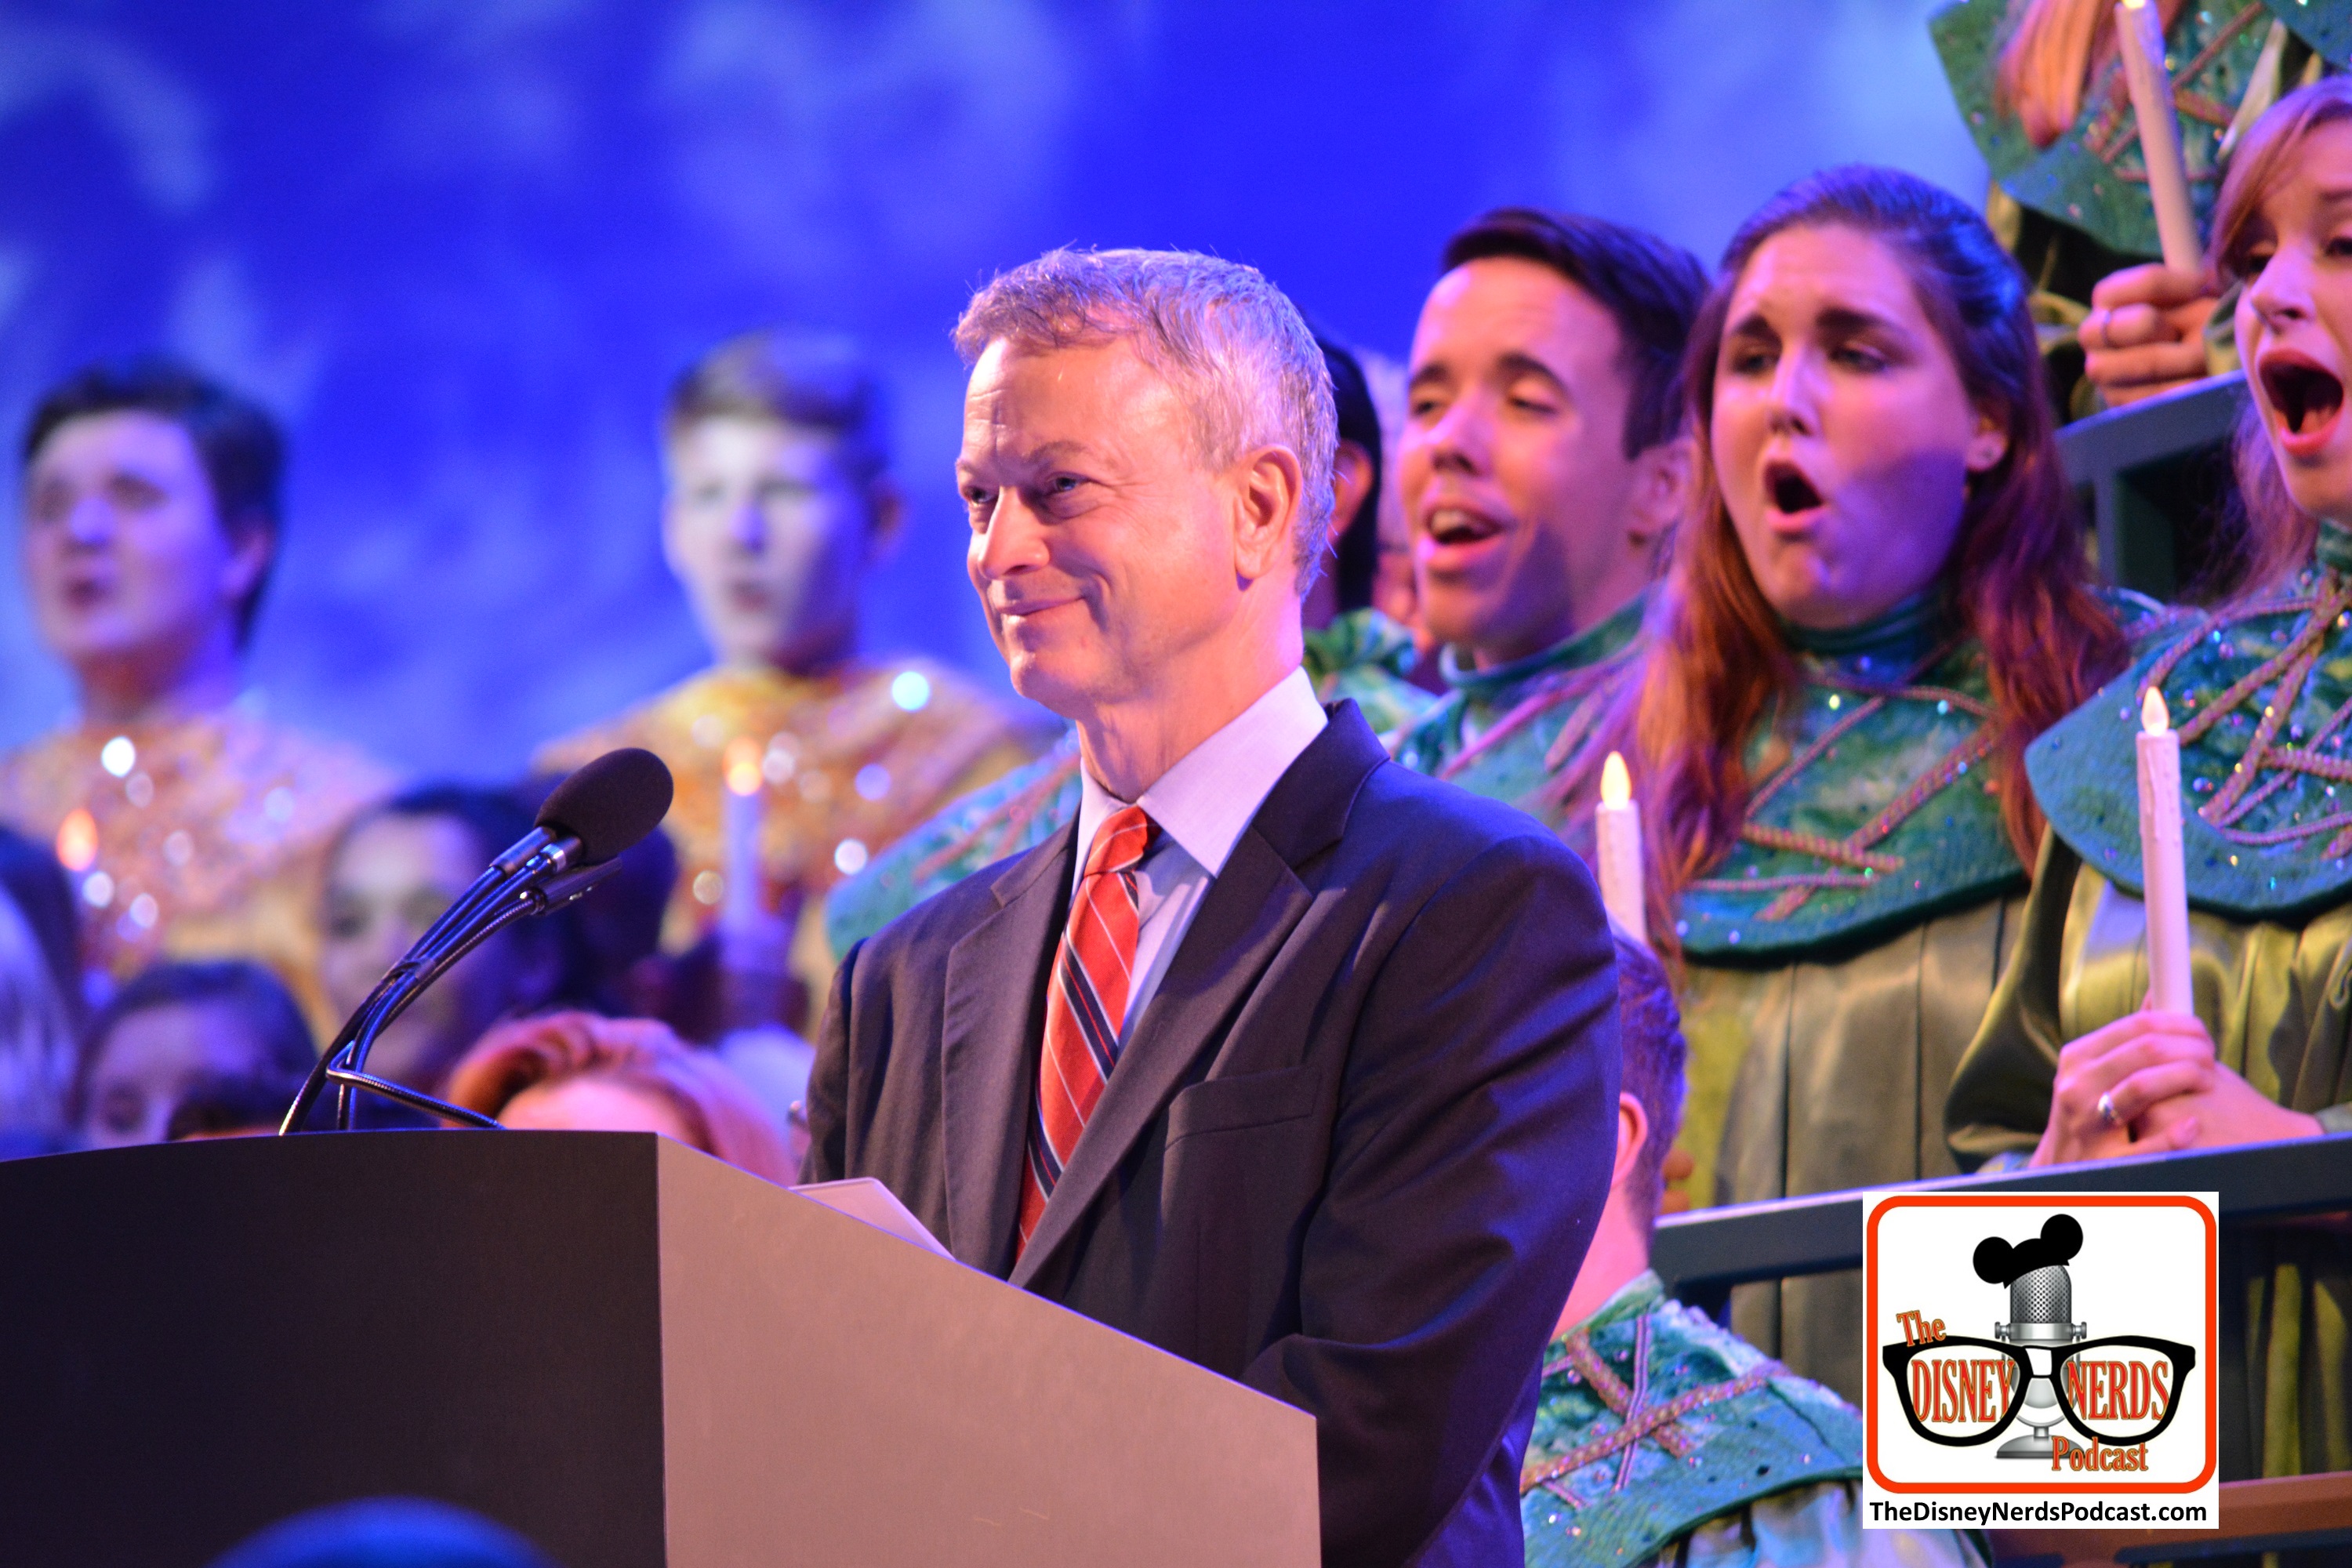 2015-12 - Epcot - The Candlelight Processional is a must see in the American Garden Theater - Here Gary Sinise Narrates